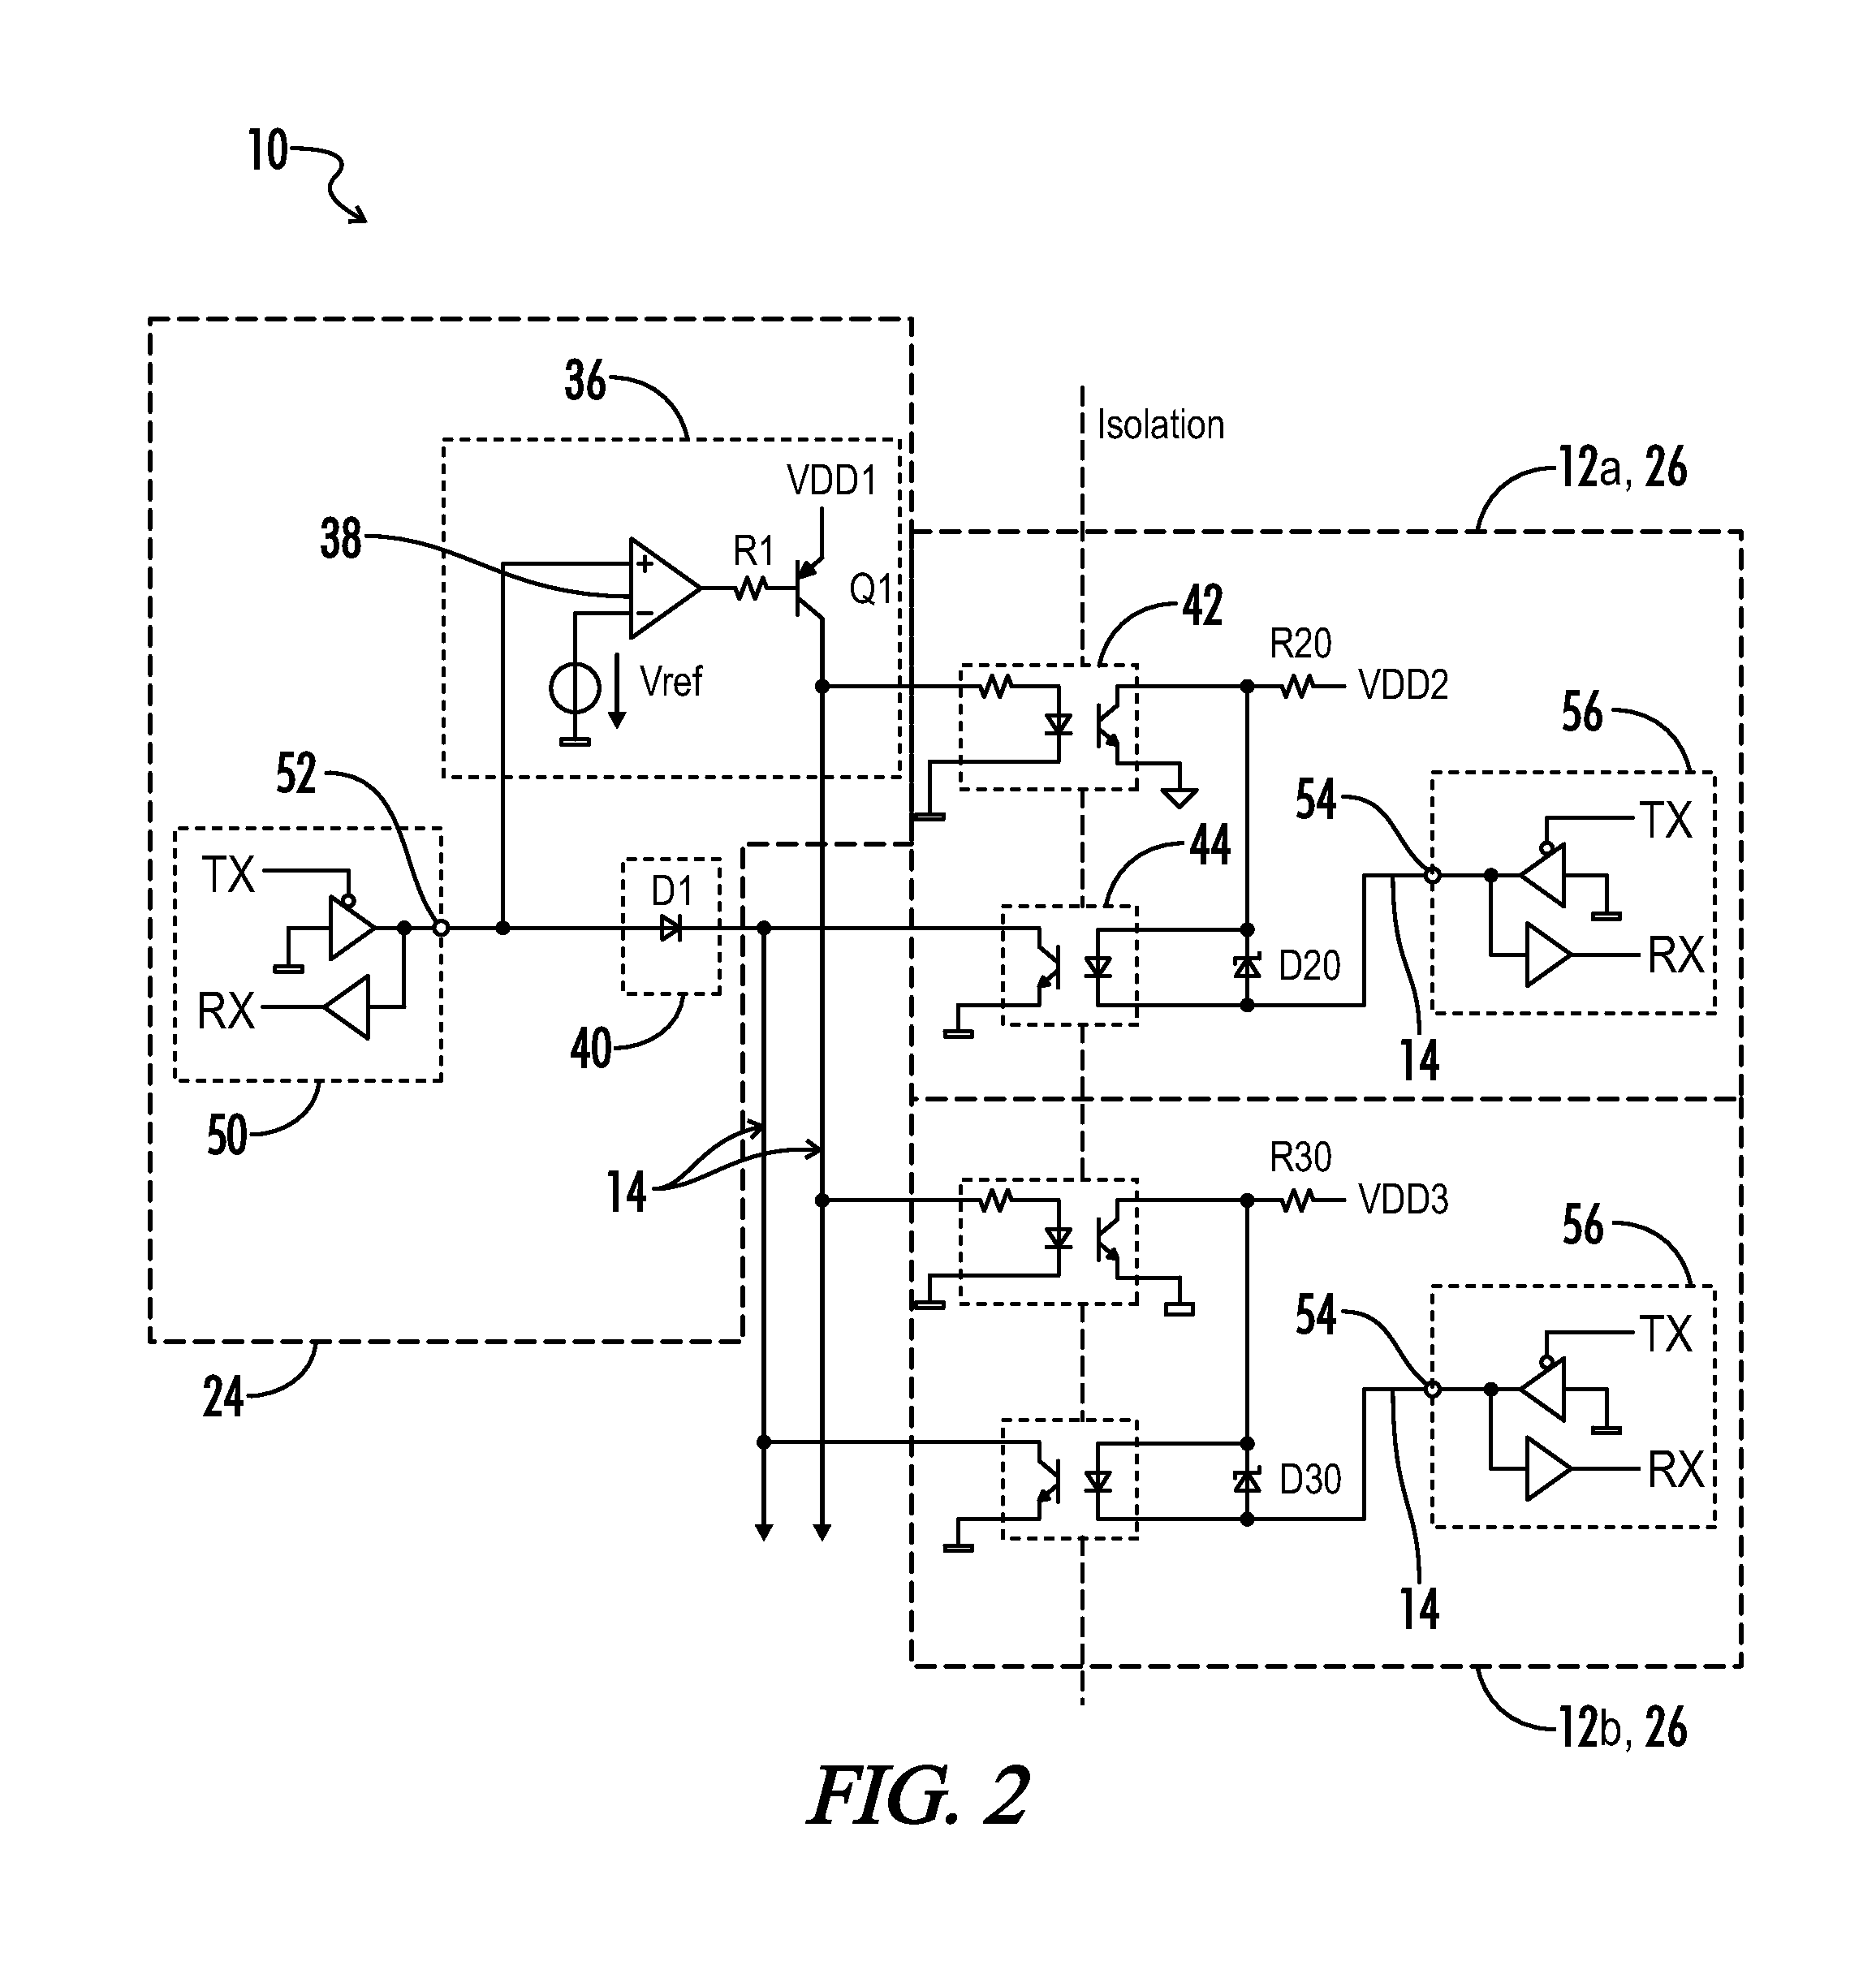 Power supply architecture for controlling and monitoring isolated output modules